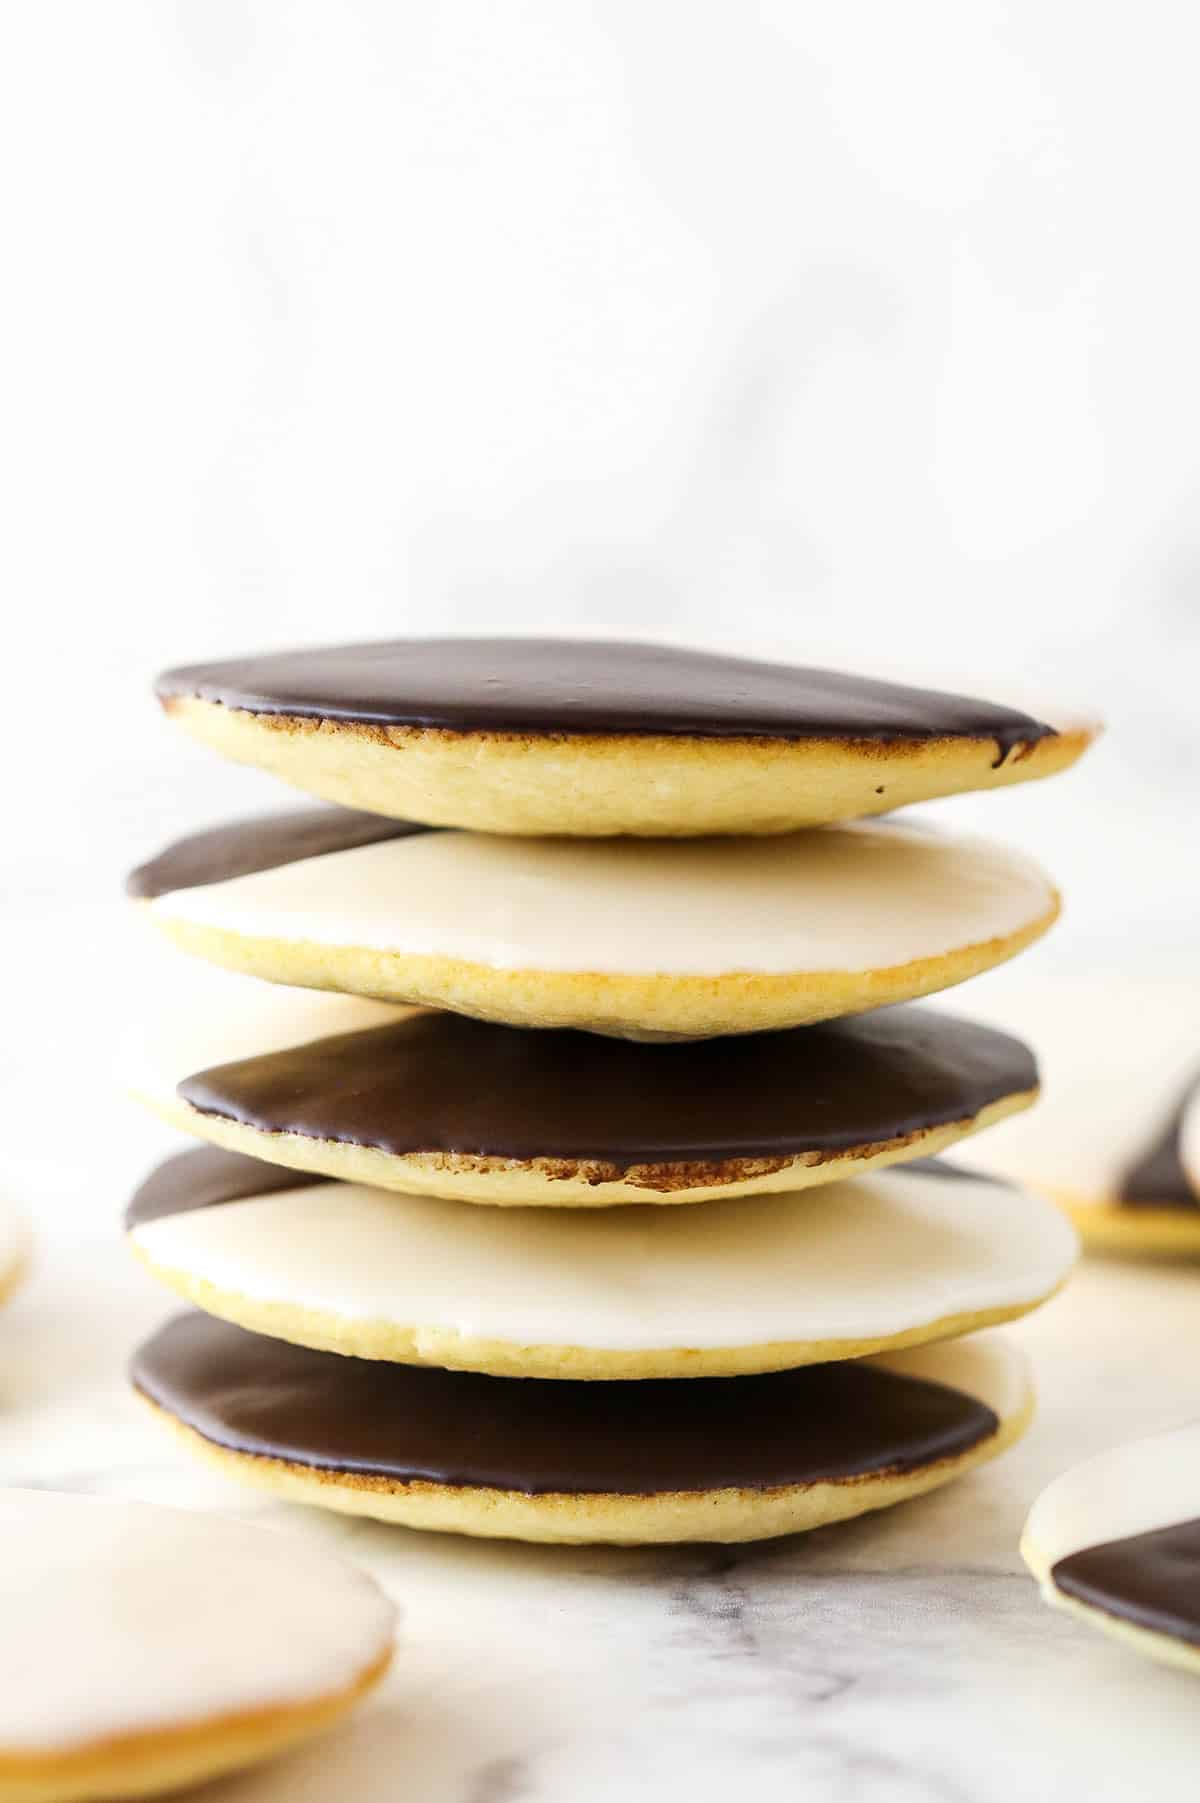 A stack of black and white cookies.